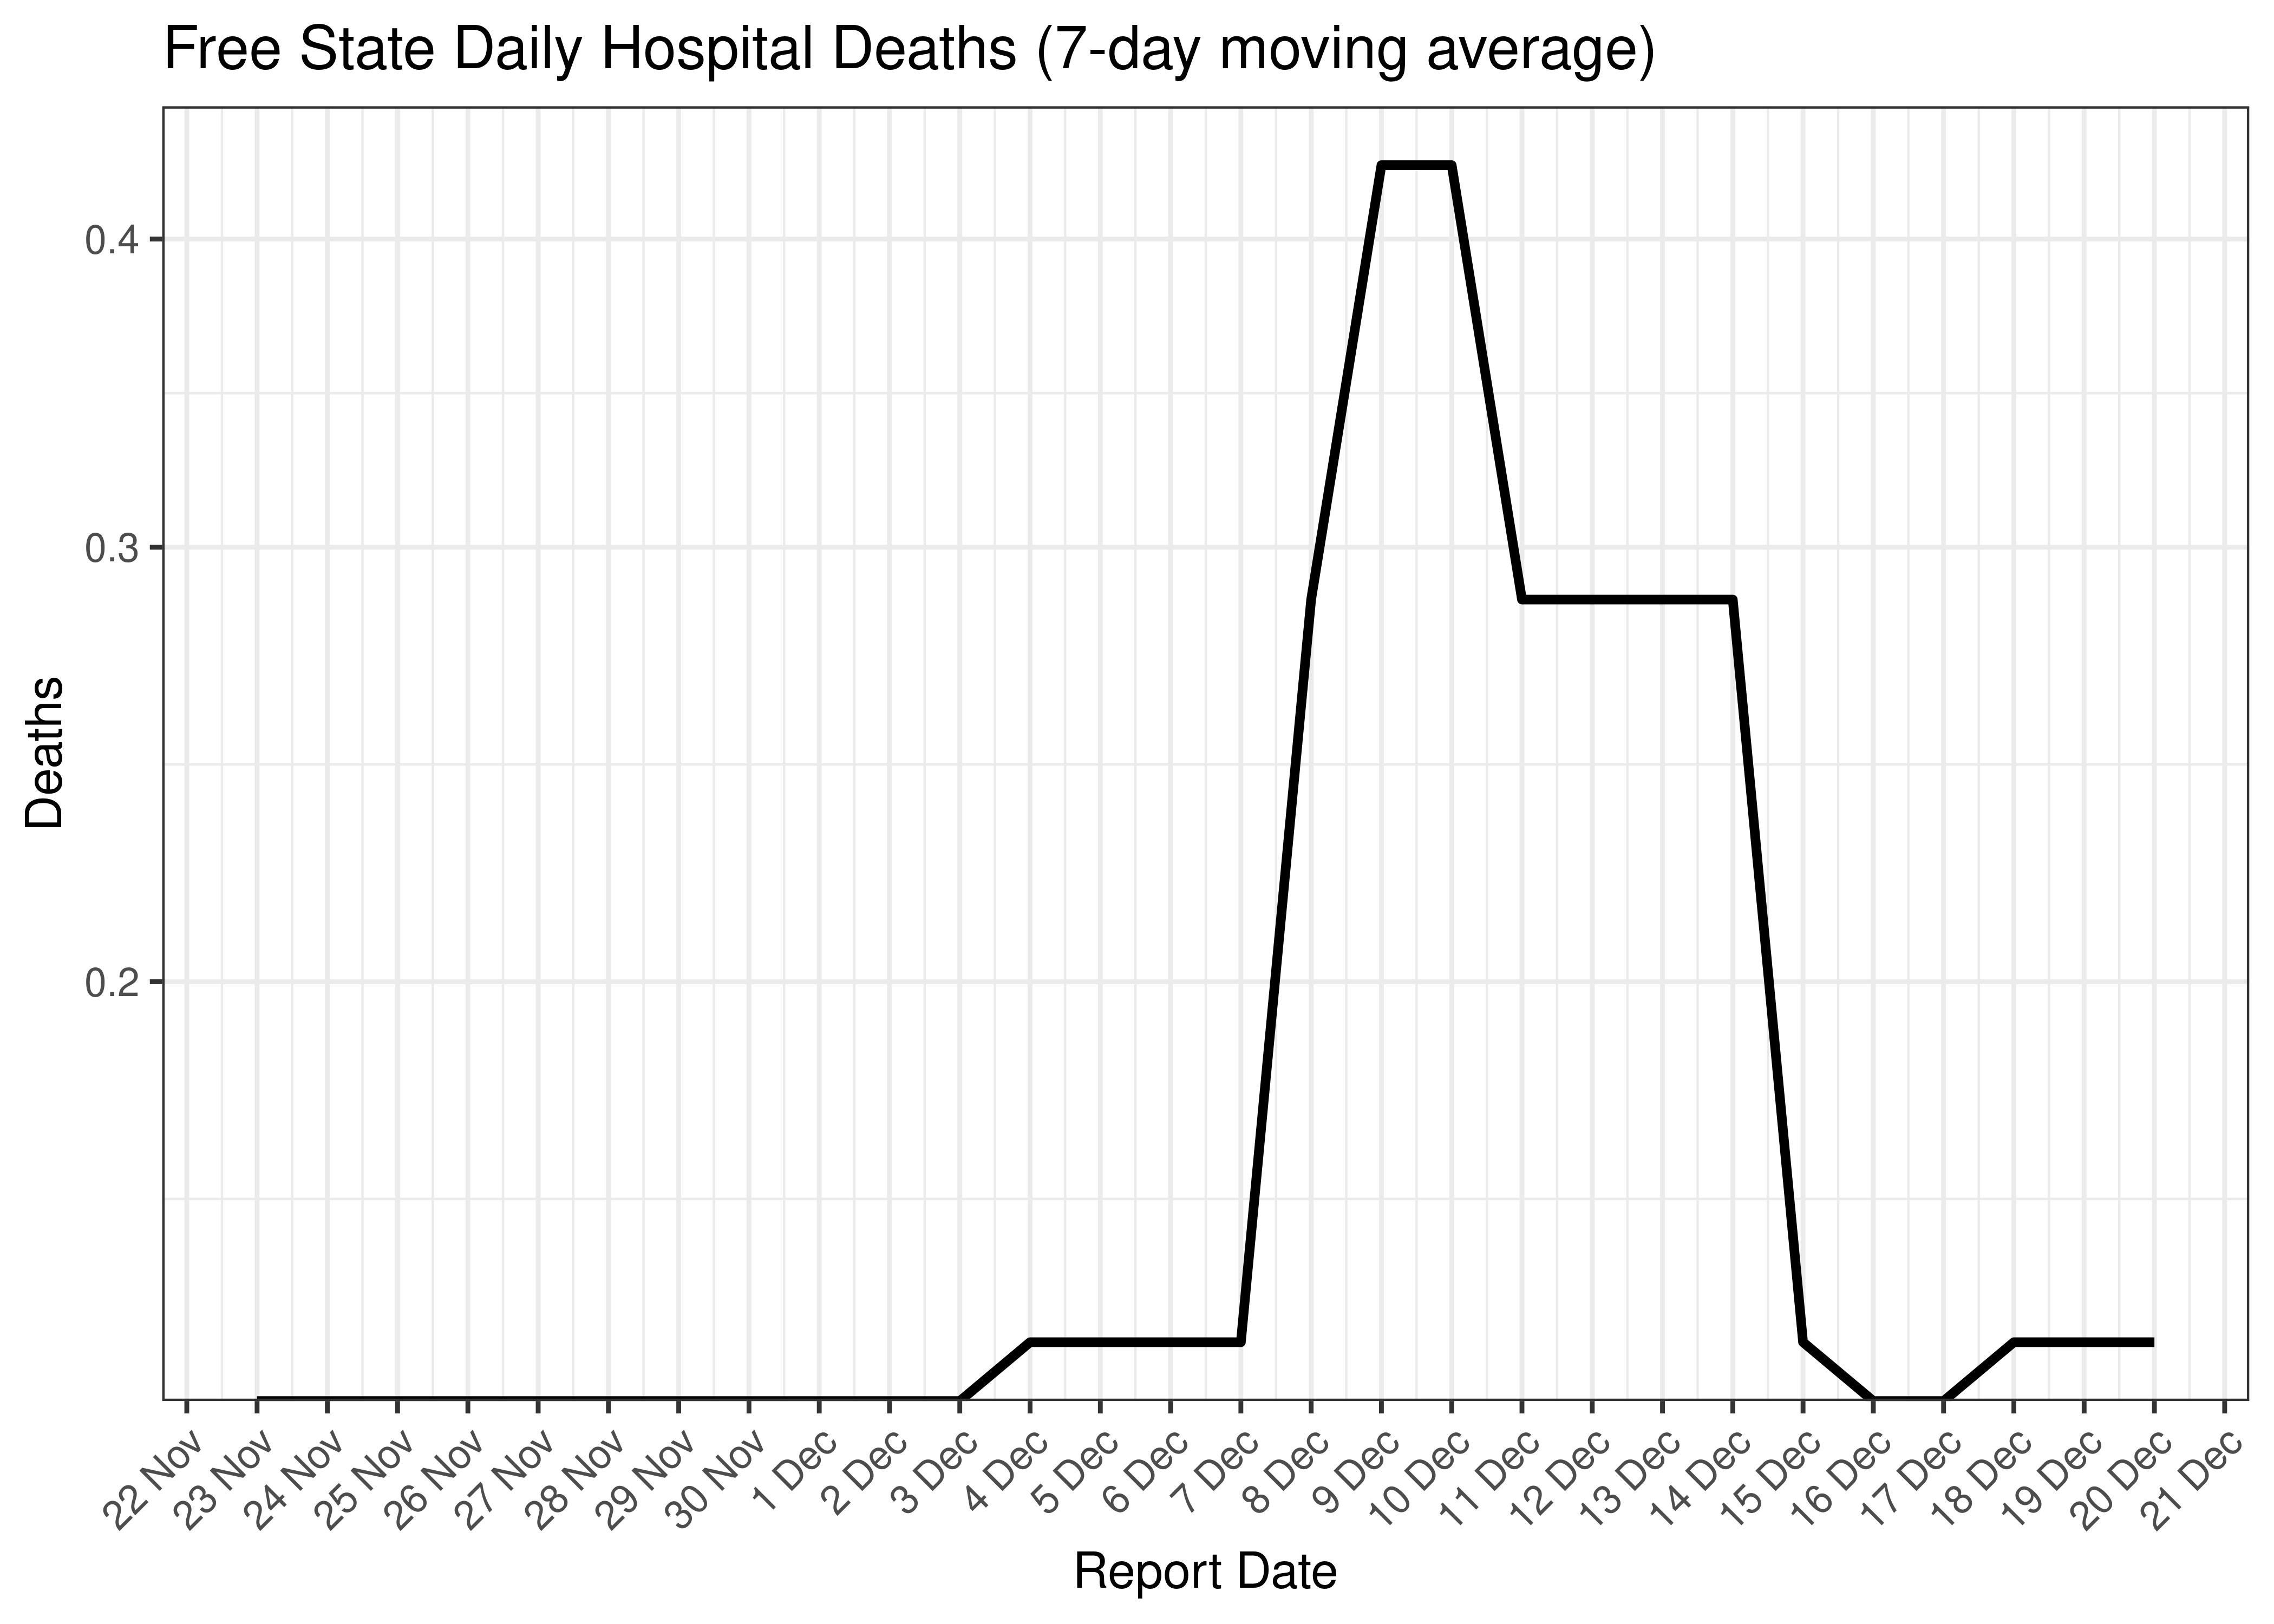 Free State Daily Hospital Deaths for Last 30-days (7-day moving average)